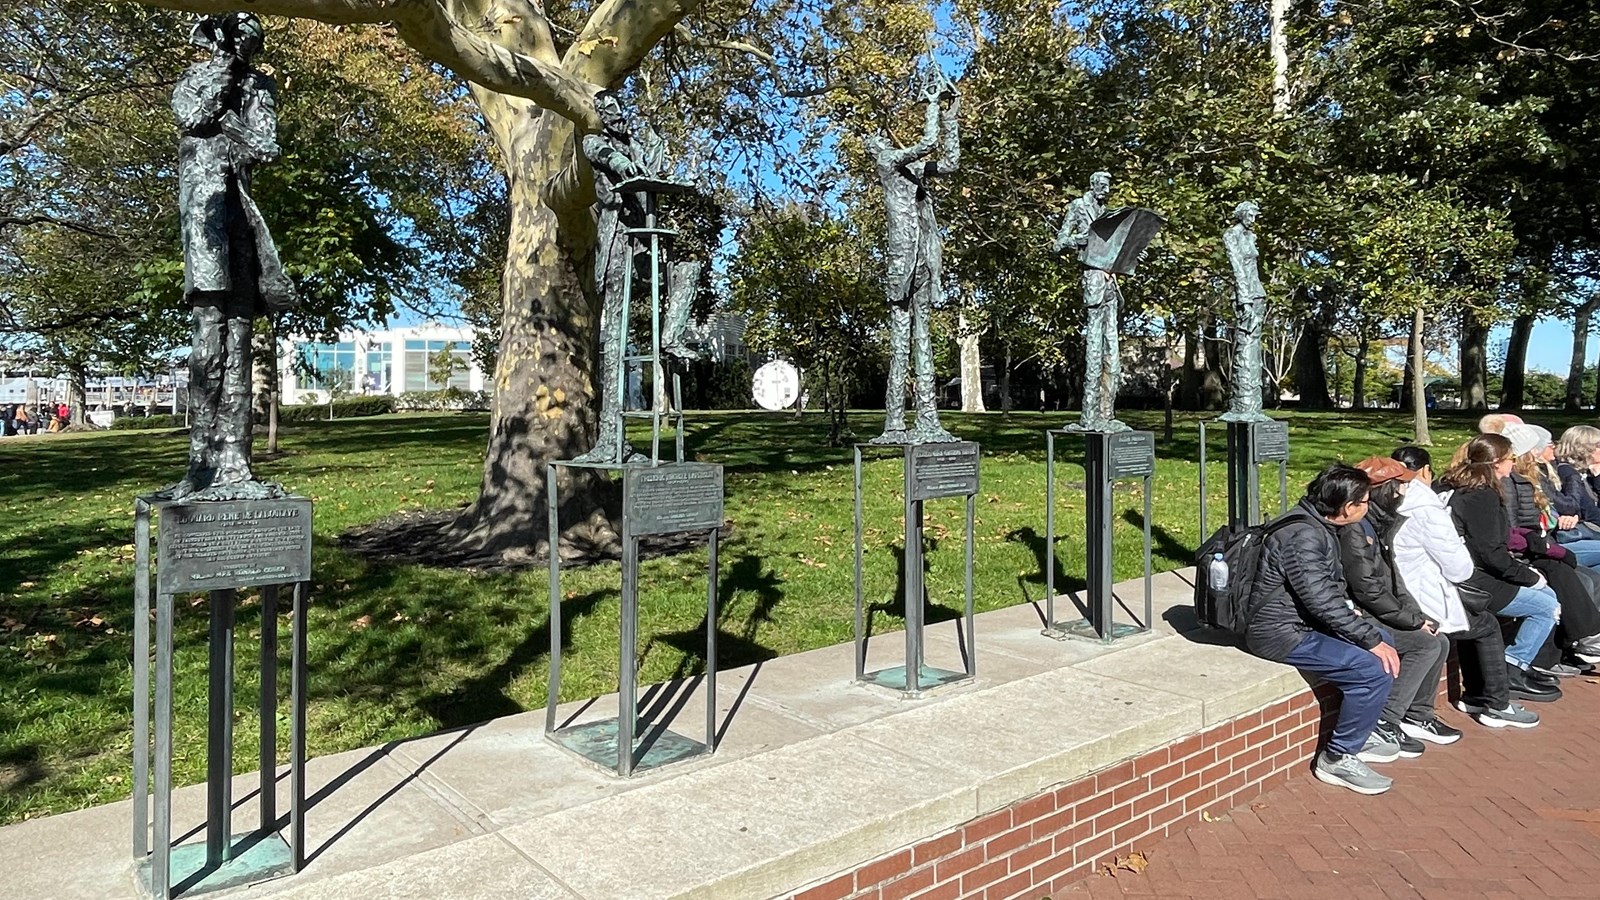 Five metal sculptures are displayed by a walkway on Liberty Island